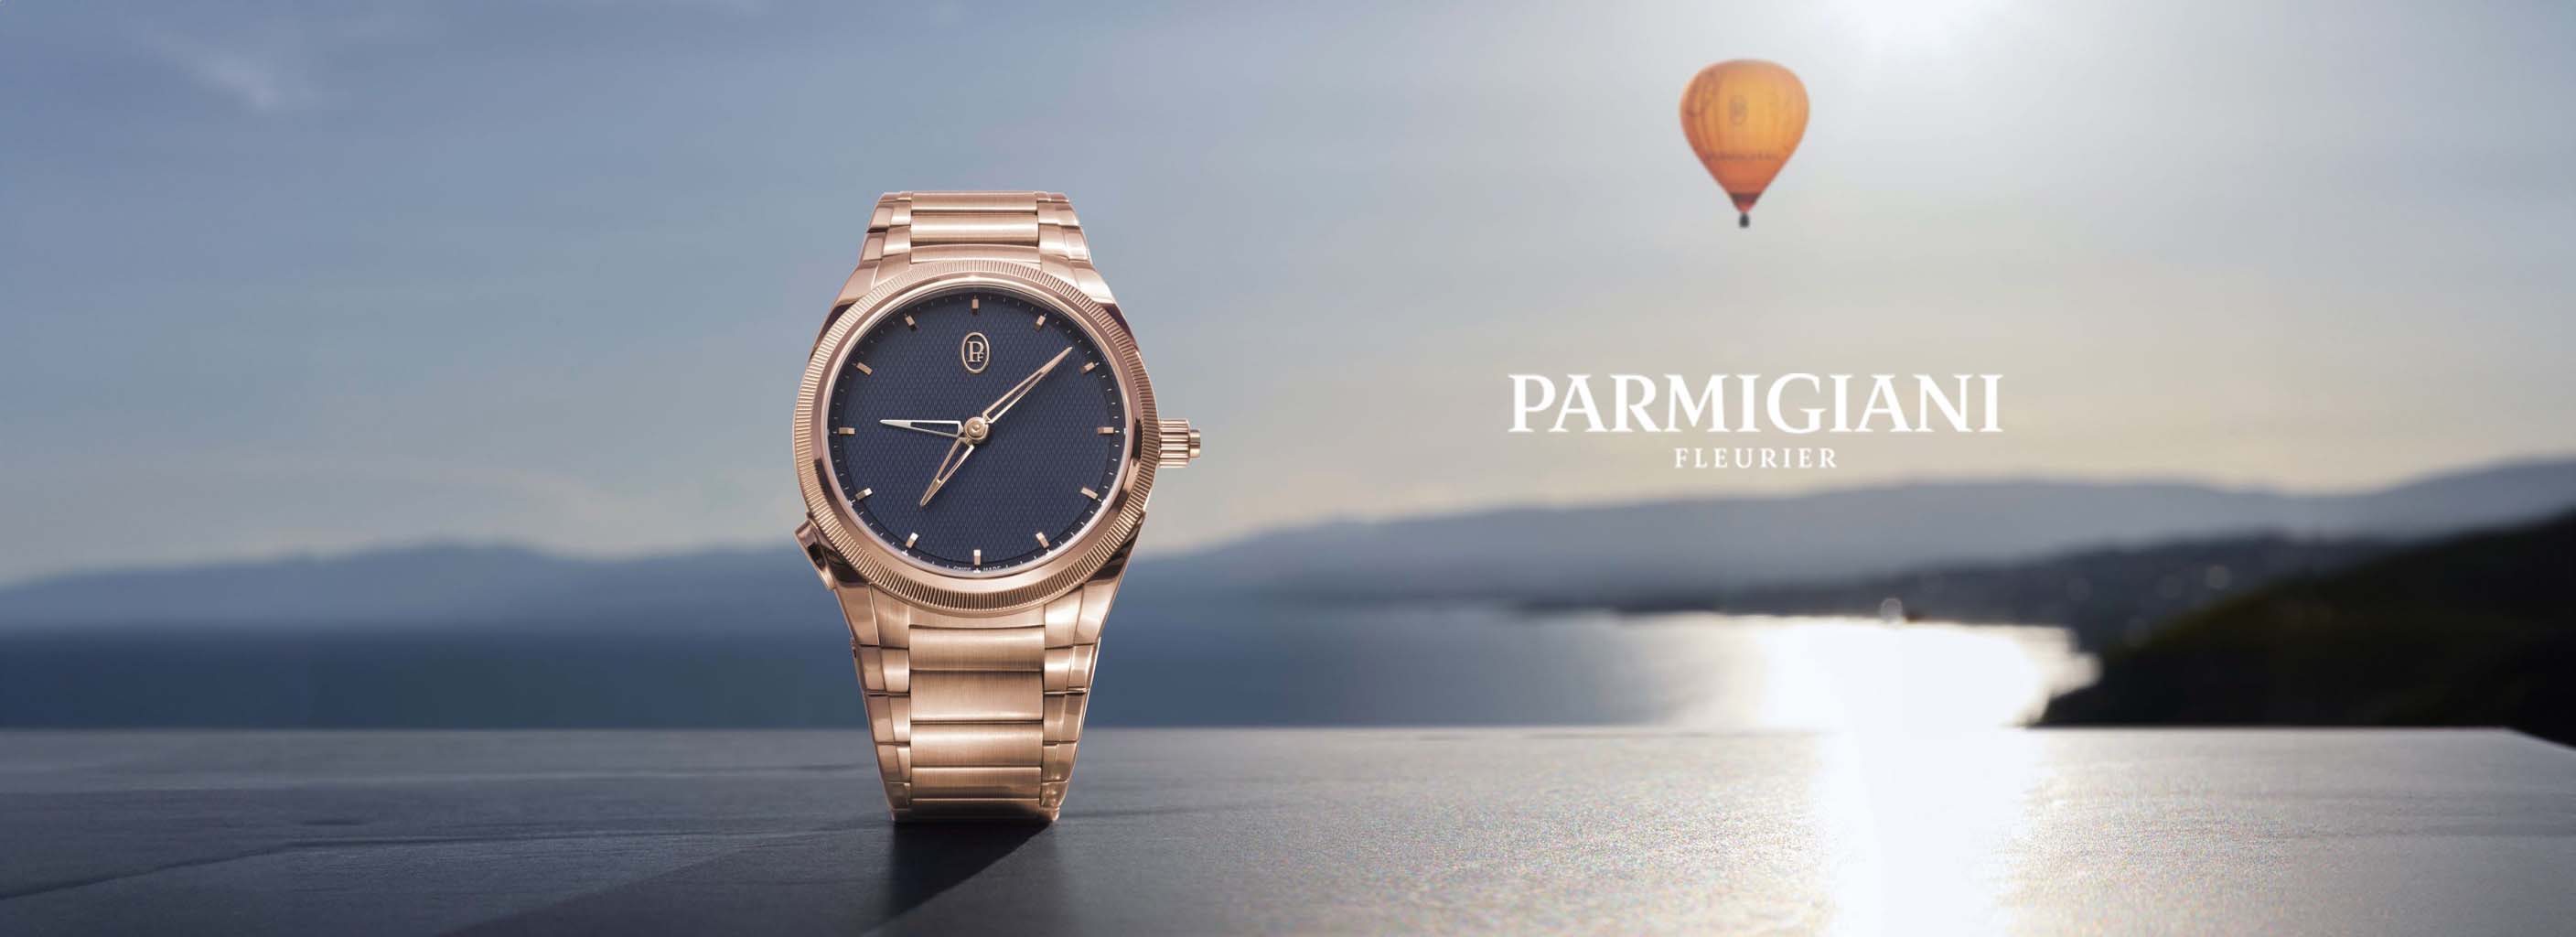 parmigiani-home-page-banner-sized